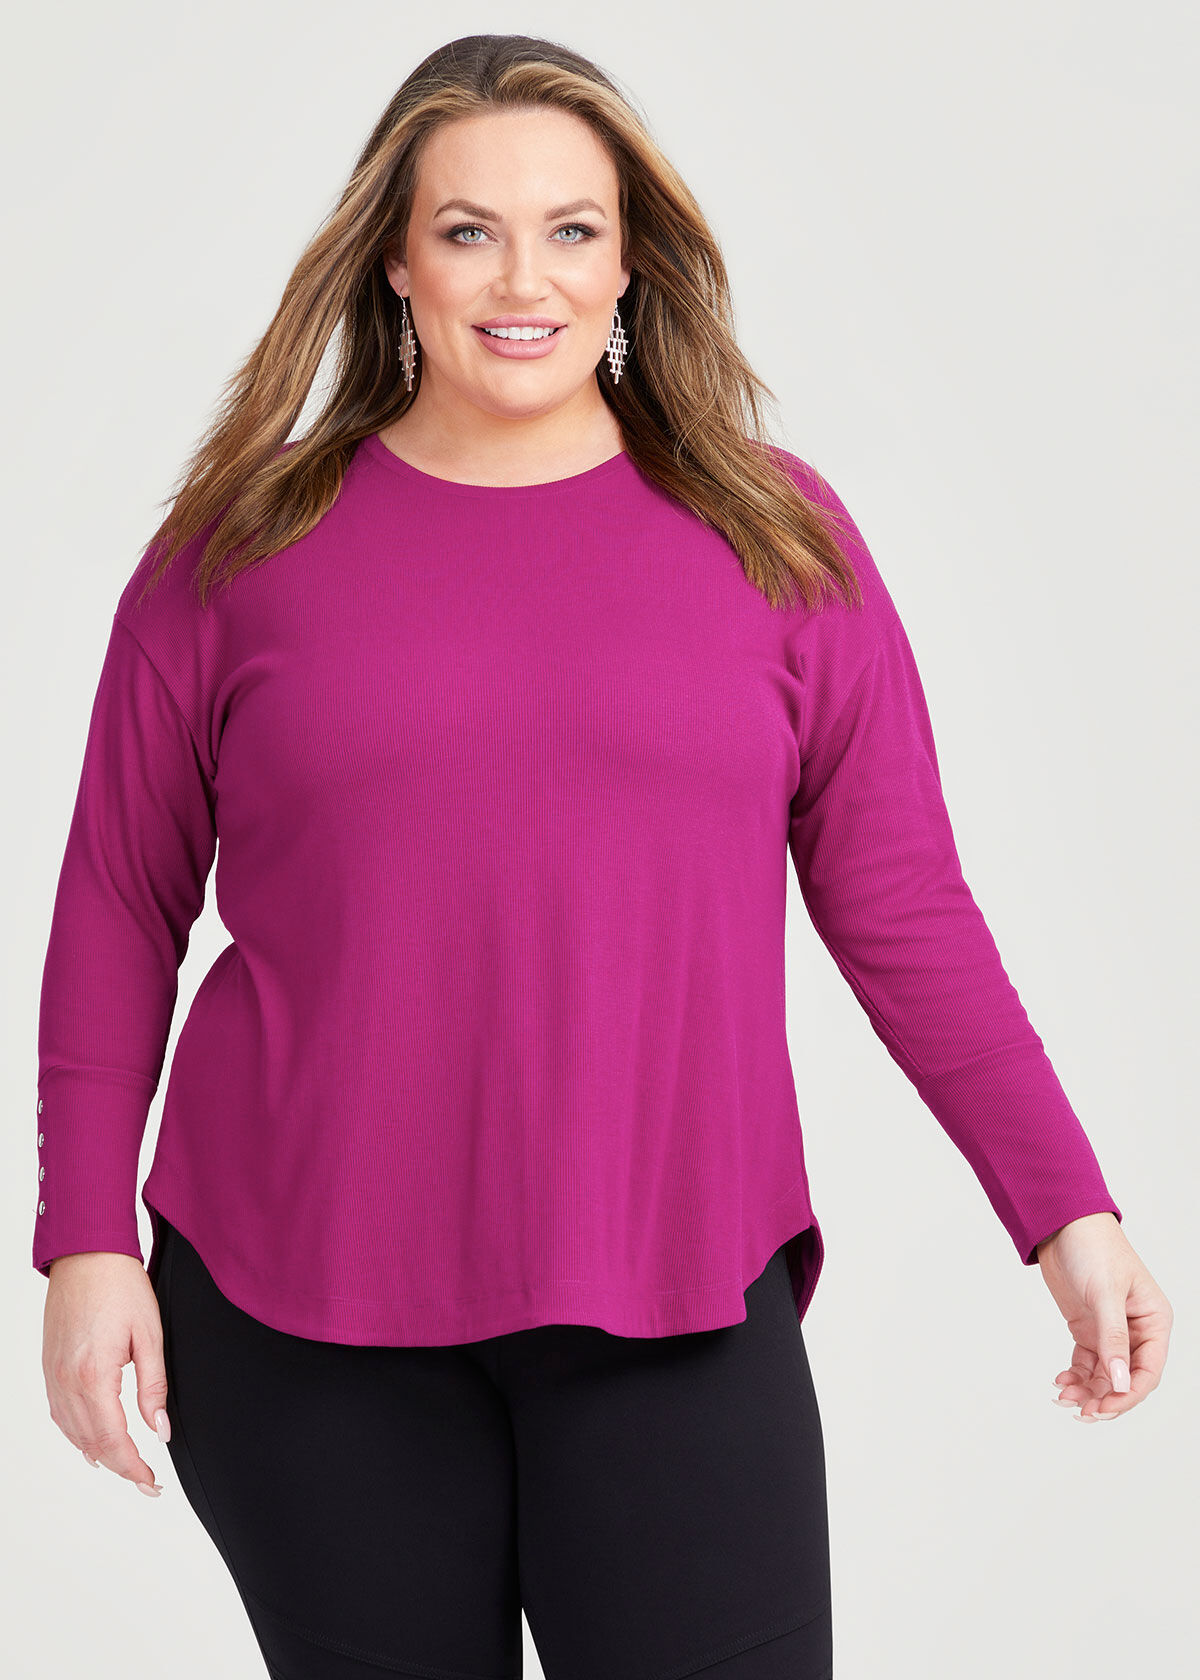 50 Plus Size Outfit Ideas for every occasion In Your Life - My Curves And  Curls | Plus size winter outfits, Plus size legging outfits, Outfits with  leggings